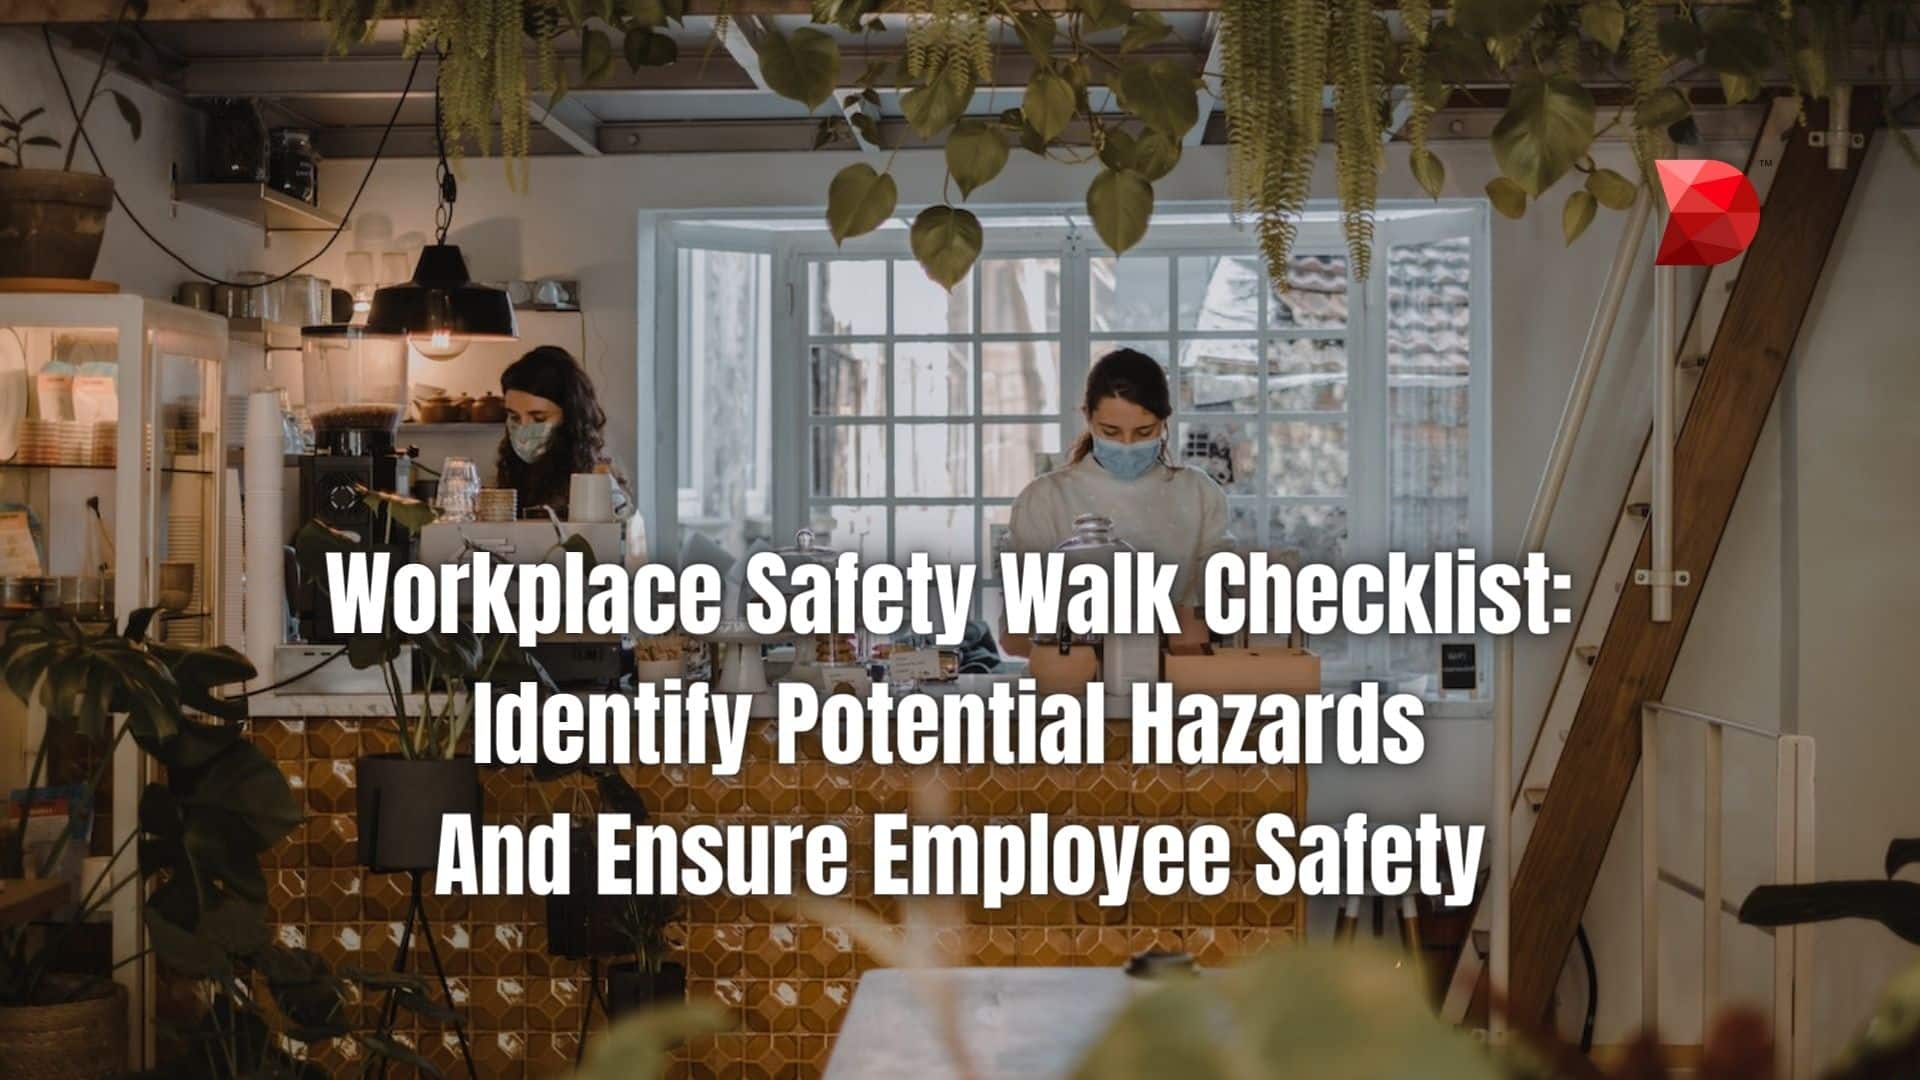 Workplace Safety Walk Checklist Identify Potential Hazards And Ensure Employee Safety